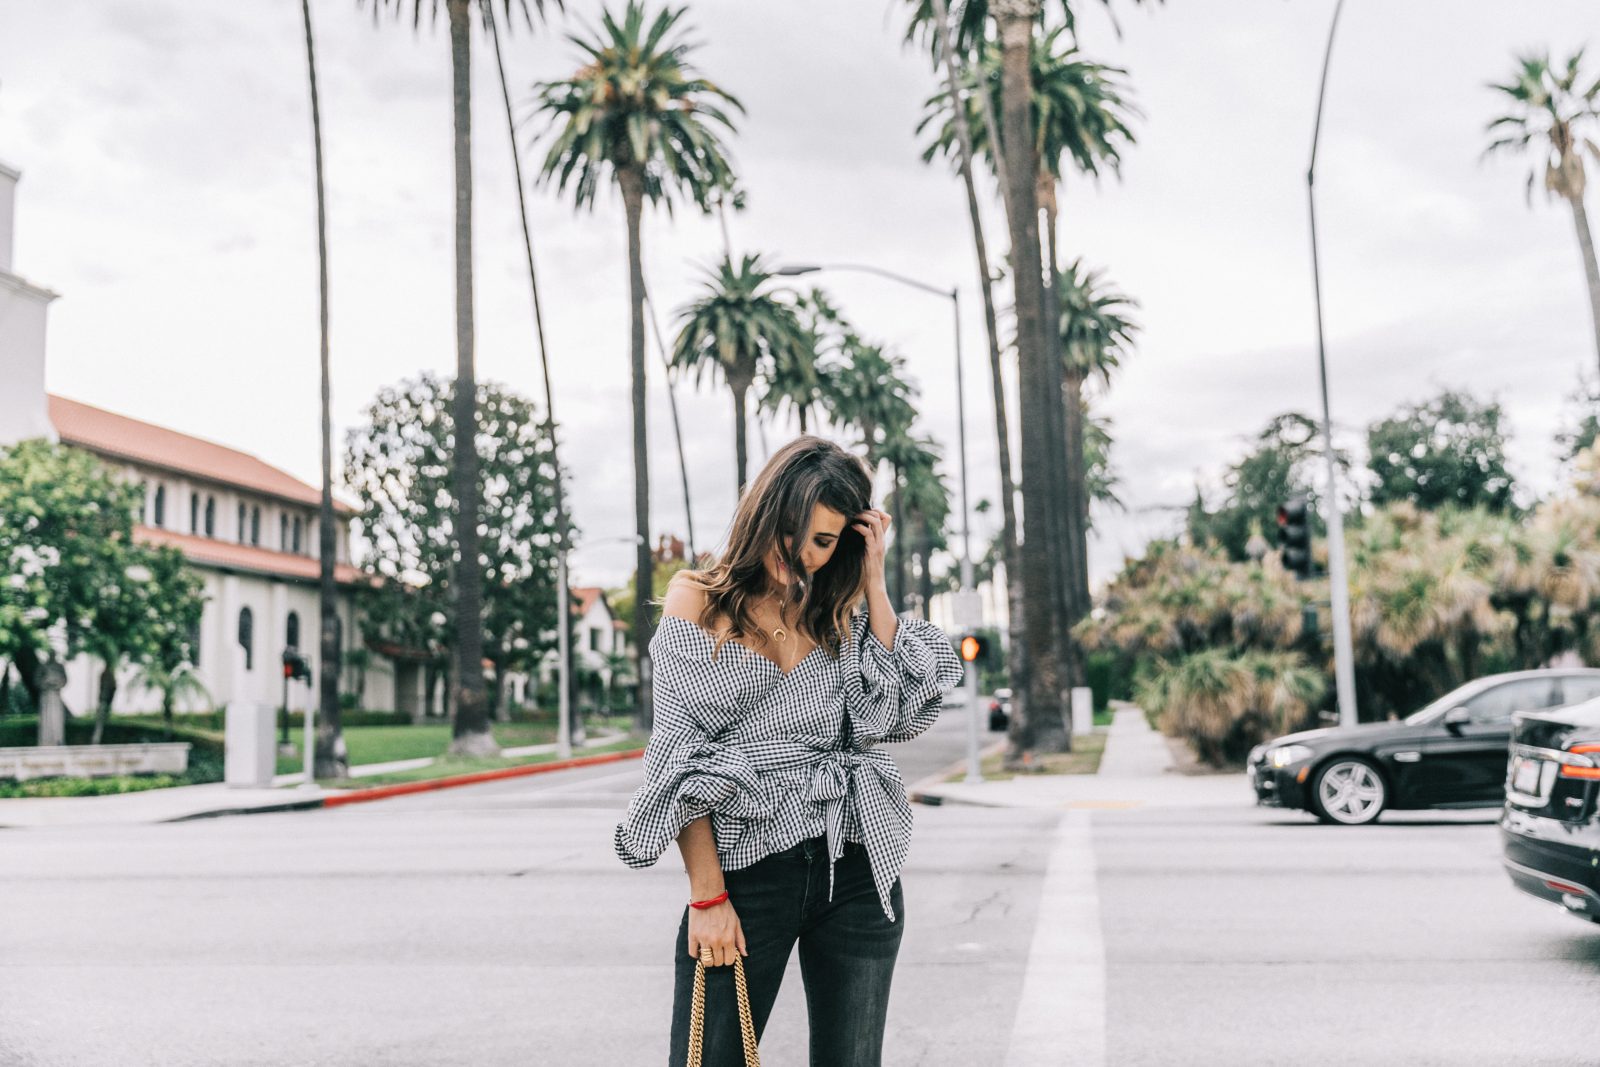 beverly_hills-off_the_shoulders_shirt-plaid-skinny_jeans-ripped_jeans-sincerely_jules_shop-gucci_bag-chicwish-outfit-street_style-los_angeles-collage_vintage-46